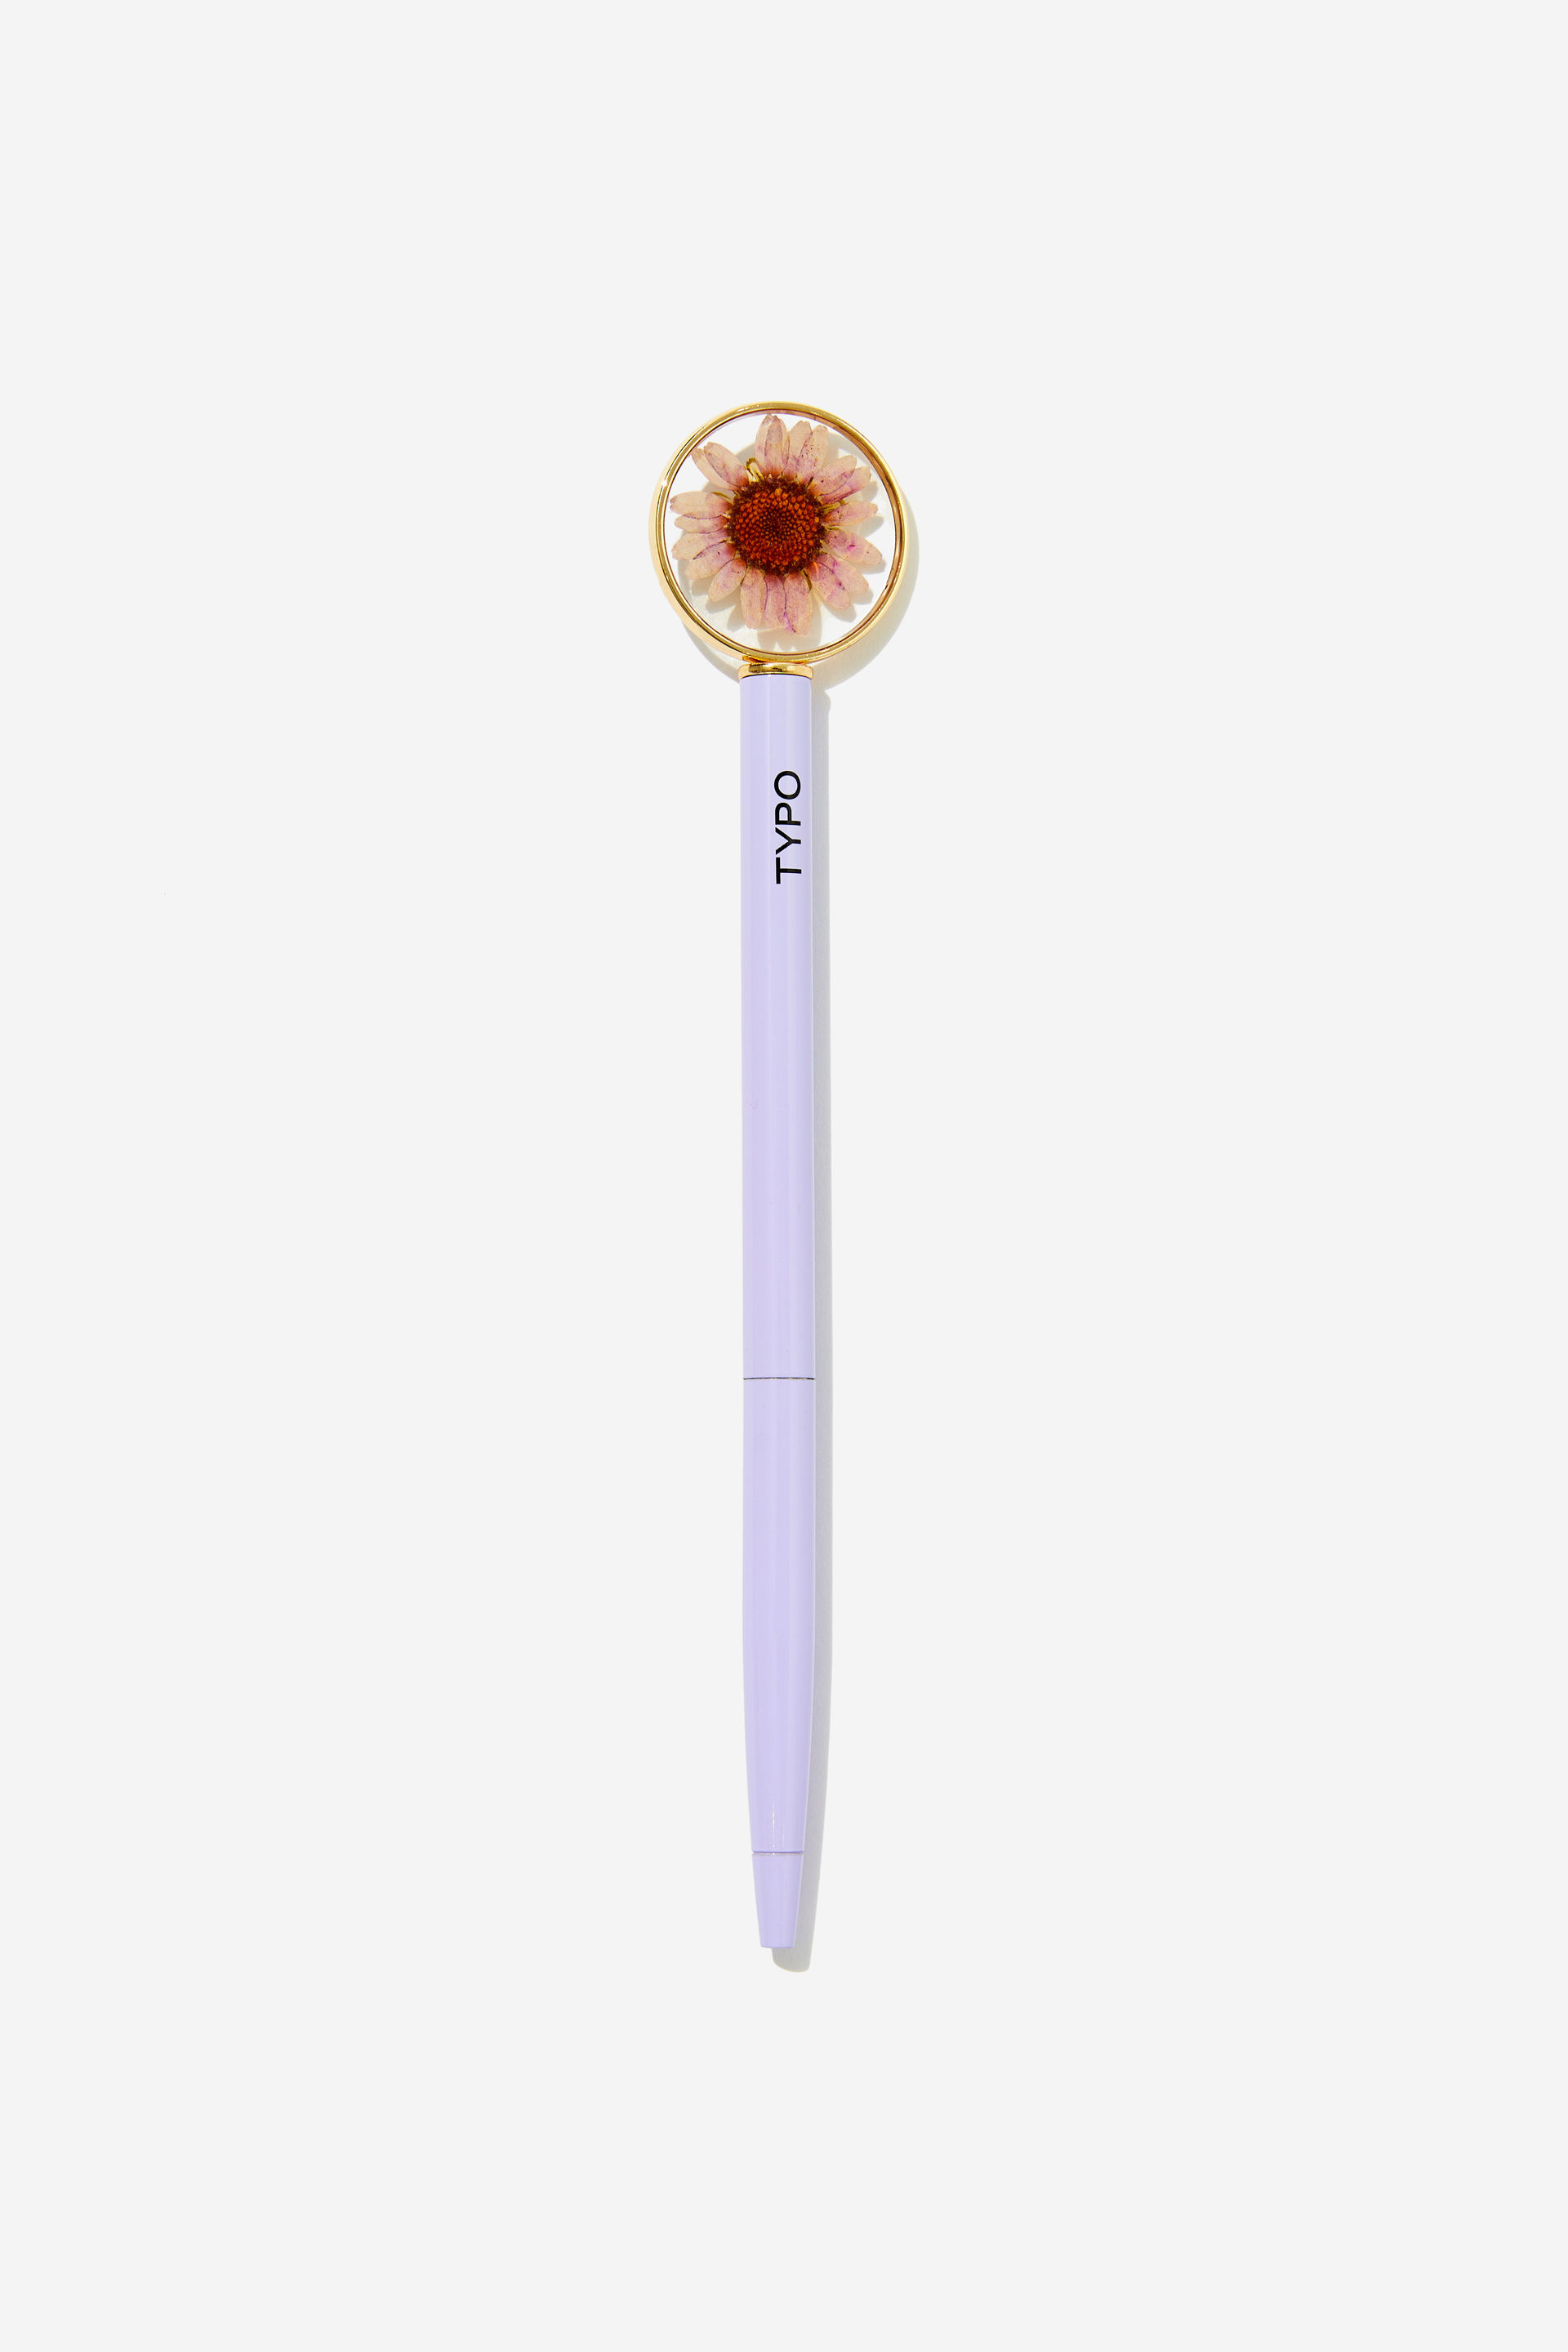 Typo - Trapped Flower Pen - Soft lilac